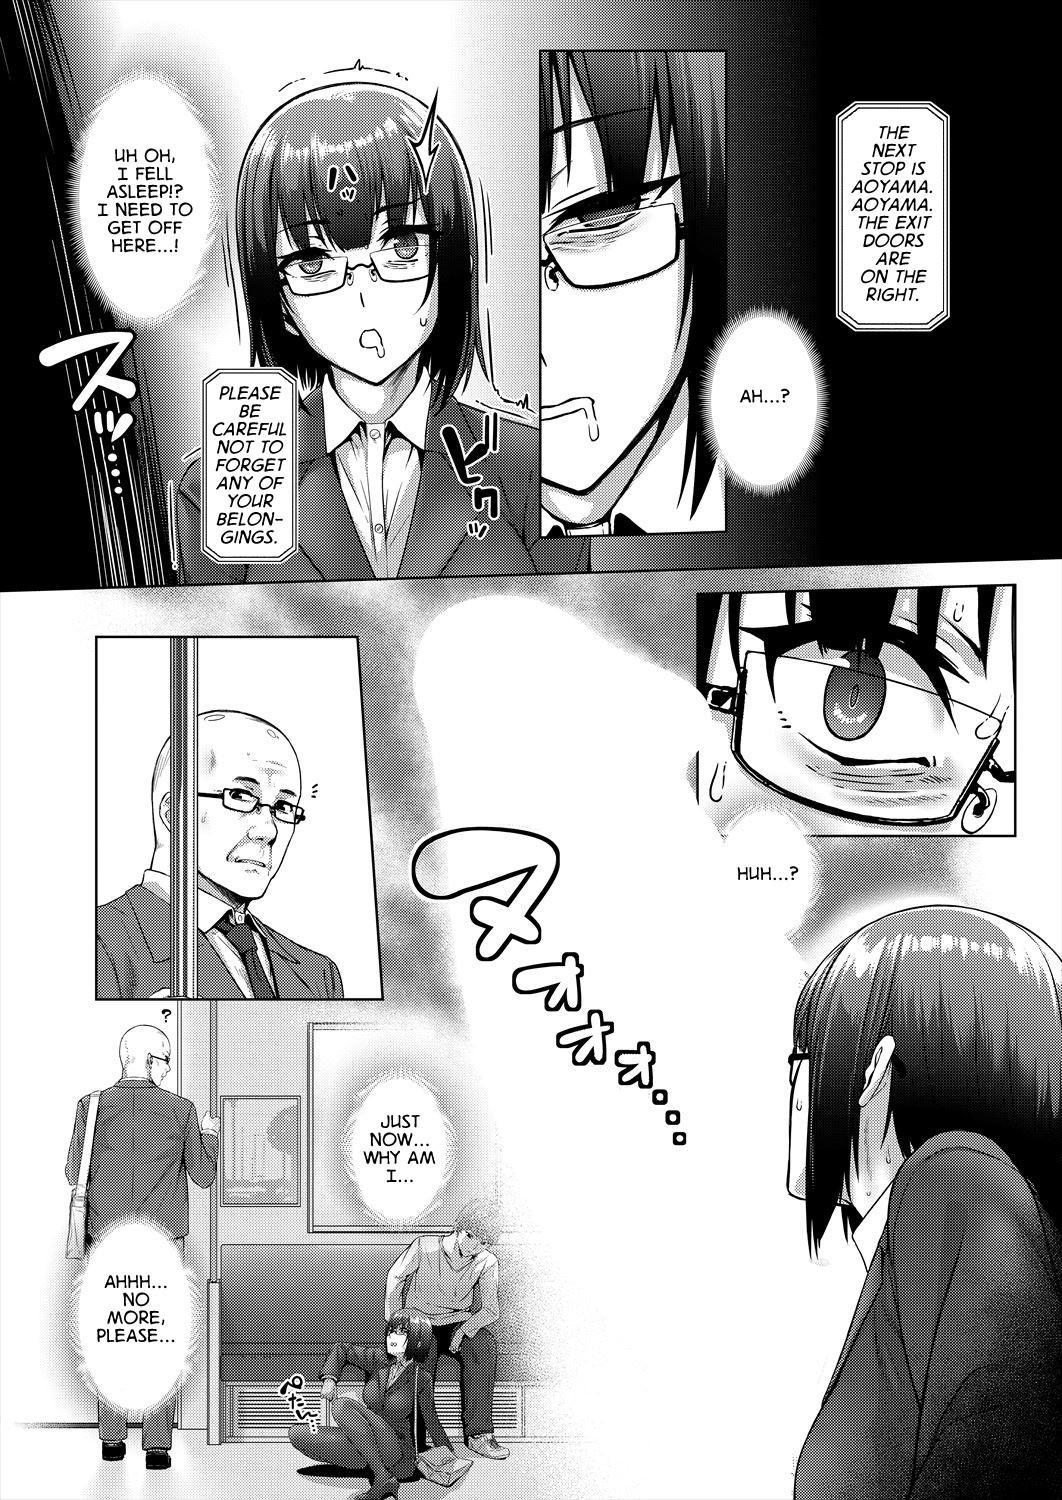 3some Kankyouon Ch. 1 | Banging Ambience Ch. 1 - Original Chicks - Page 9